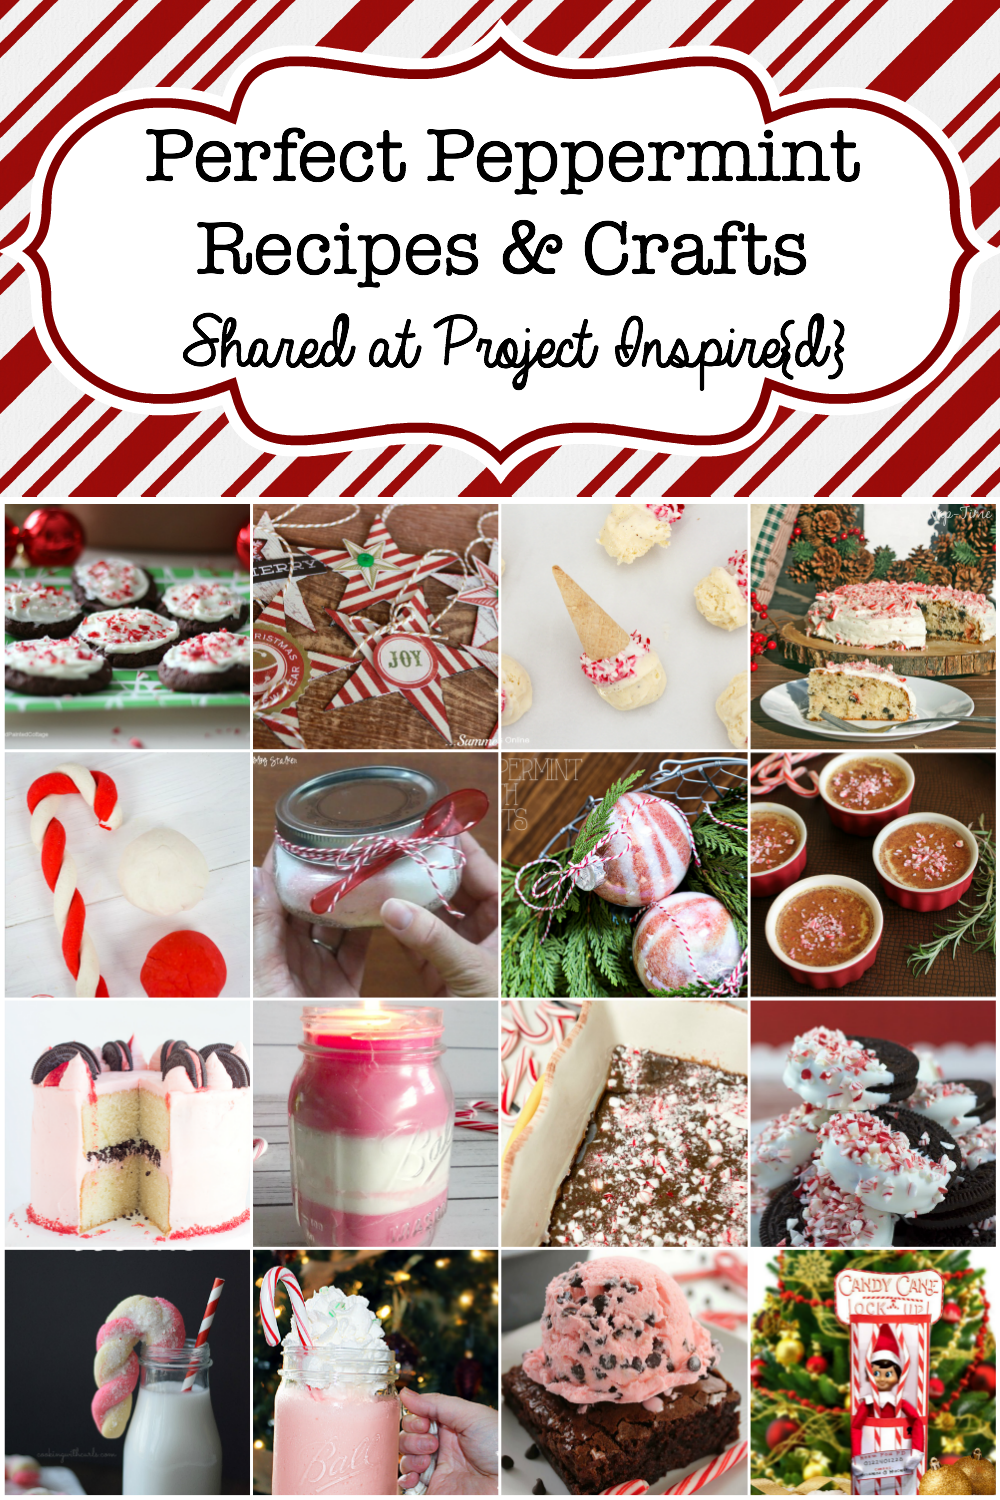 Perfect Peppermint Recipes & Crafts